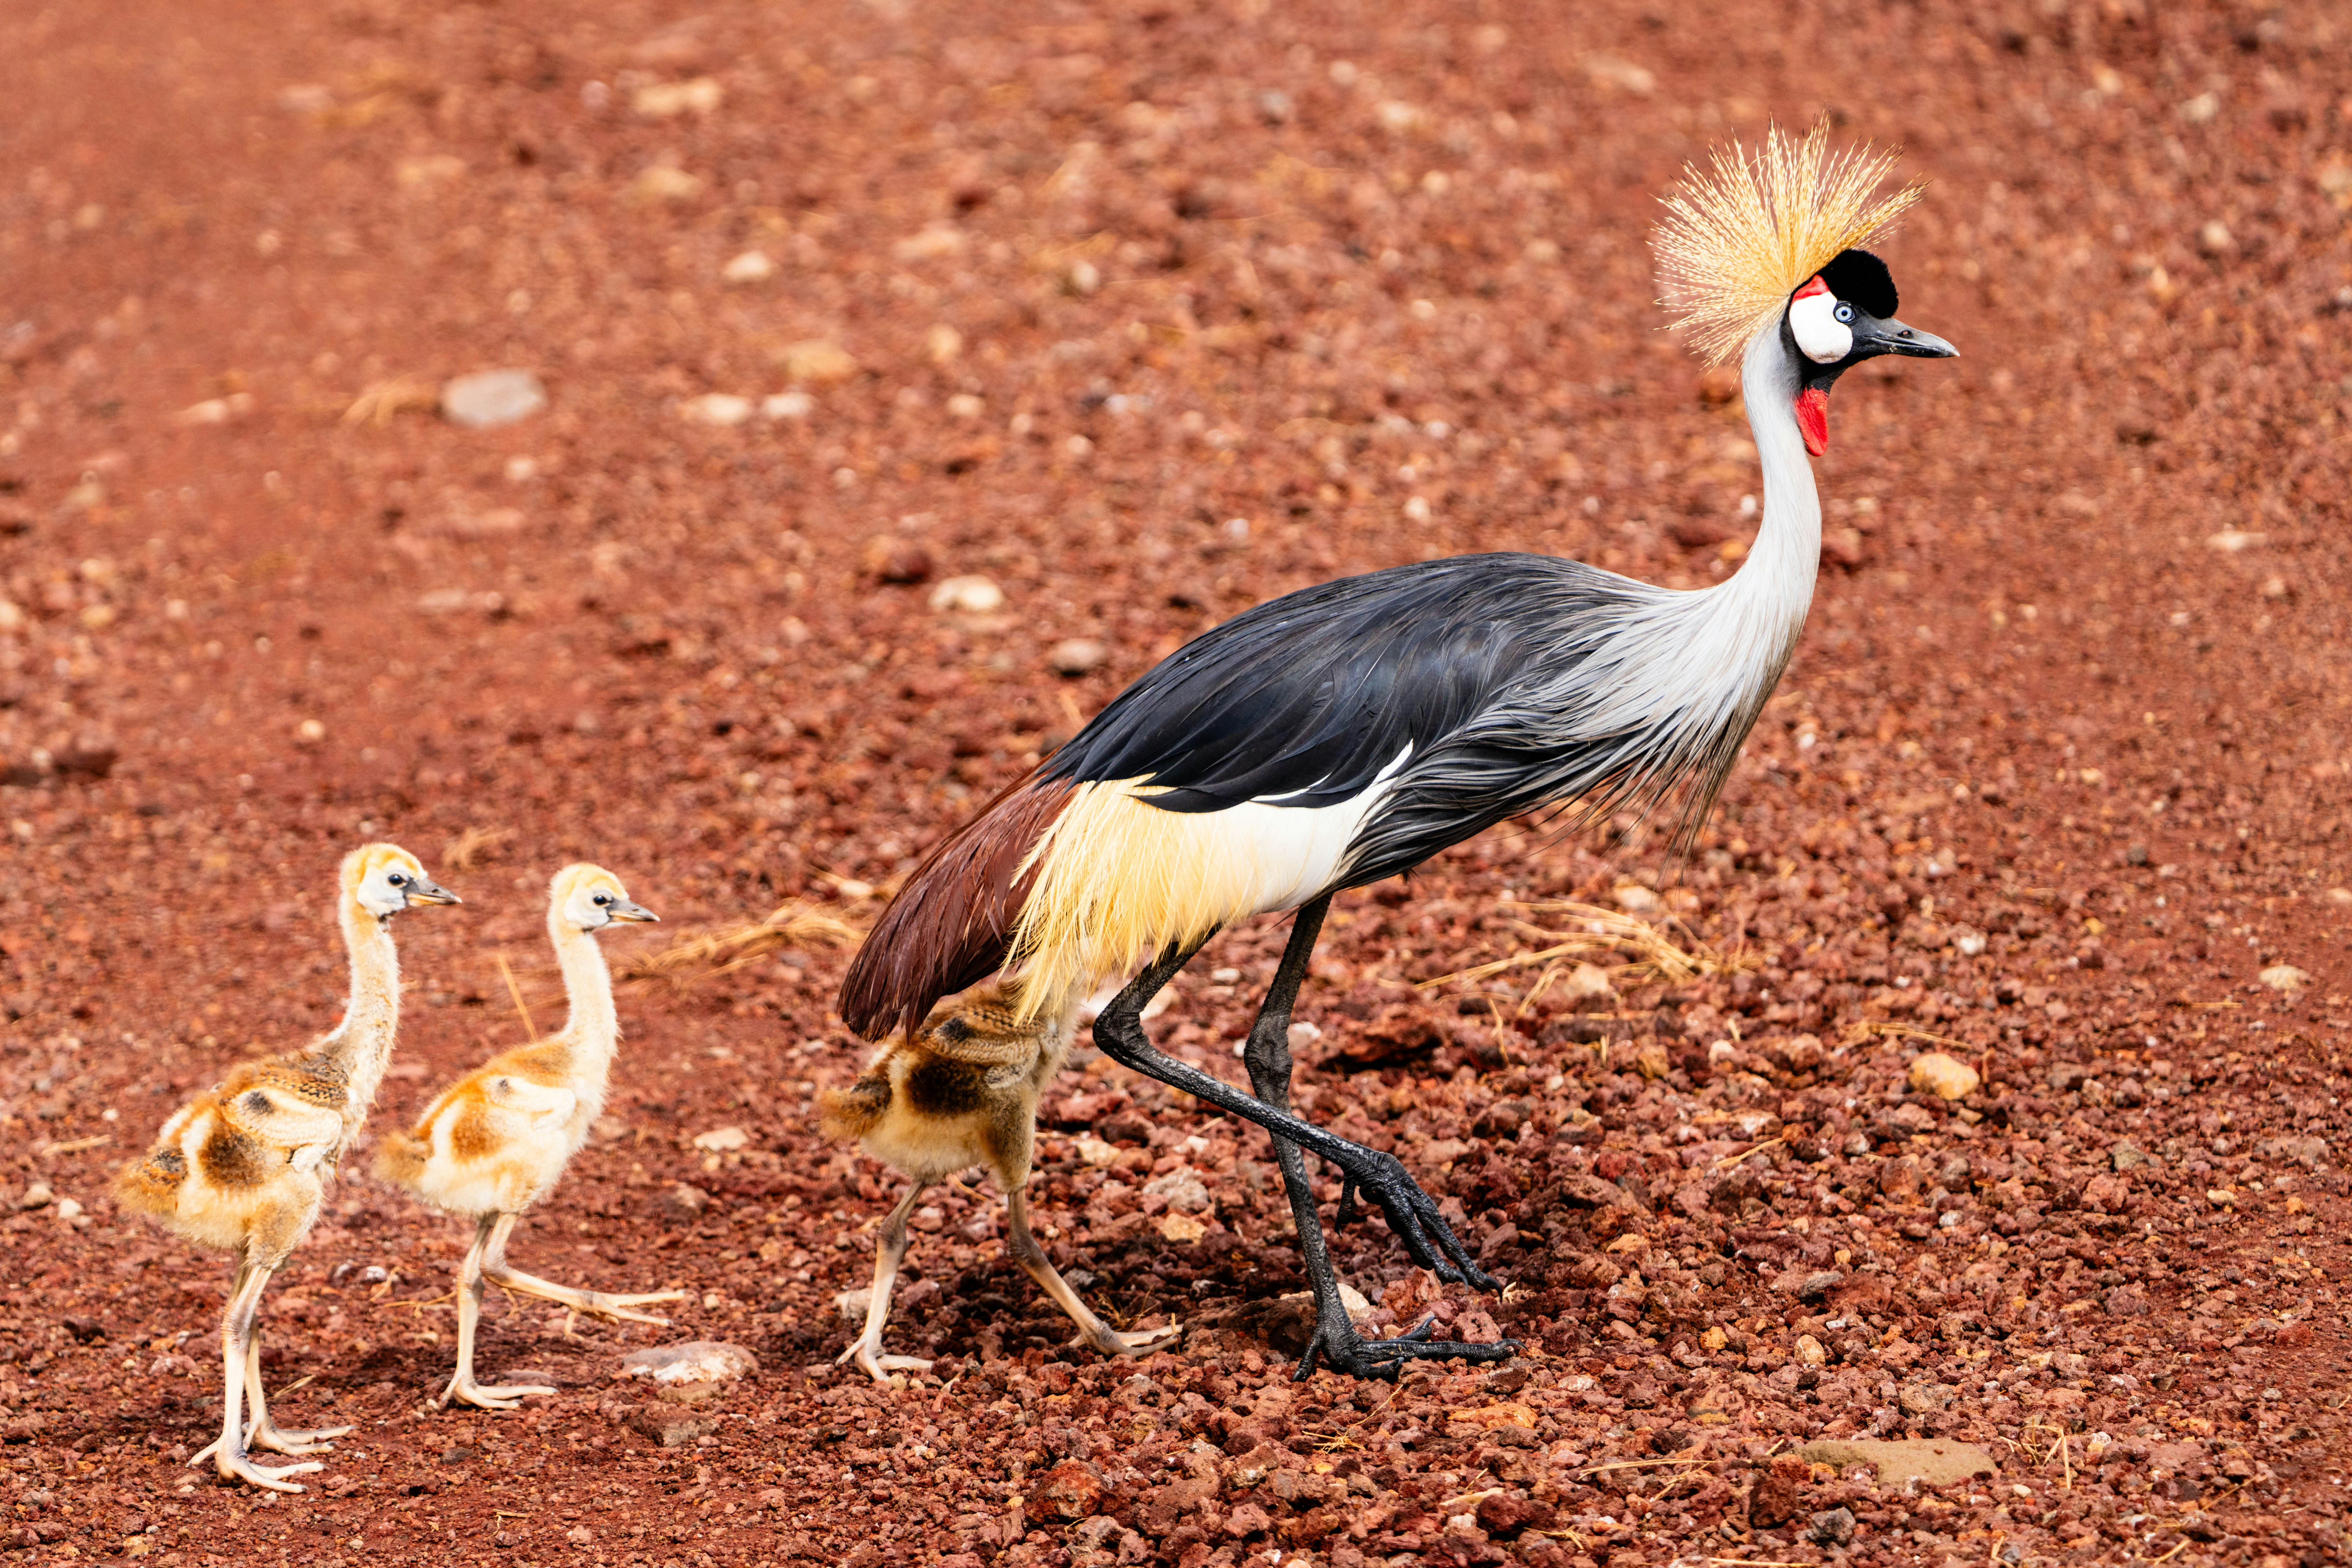 great photo recipe,how to photograph grey crowned crane with three chicks.